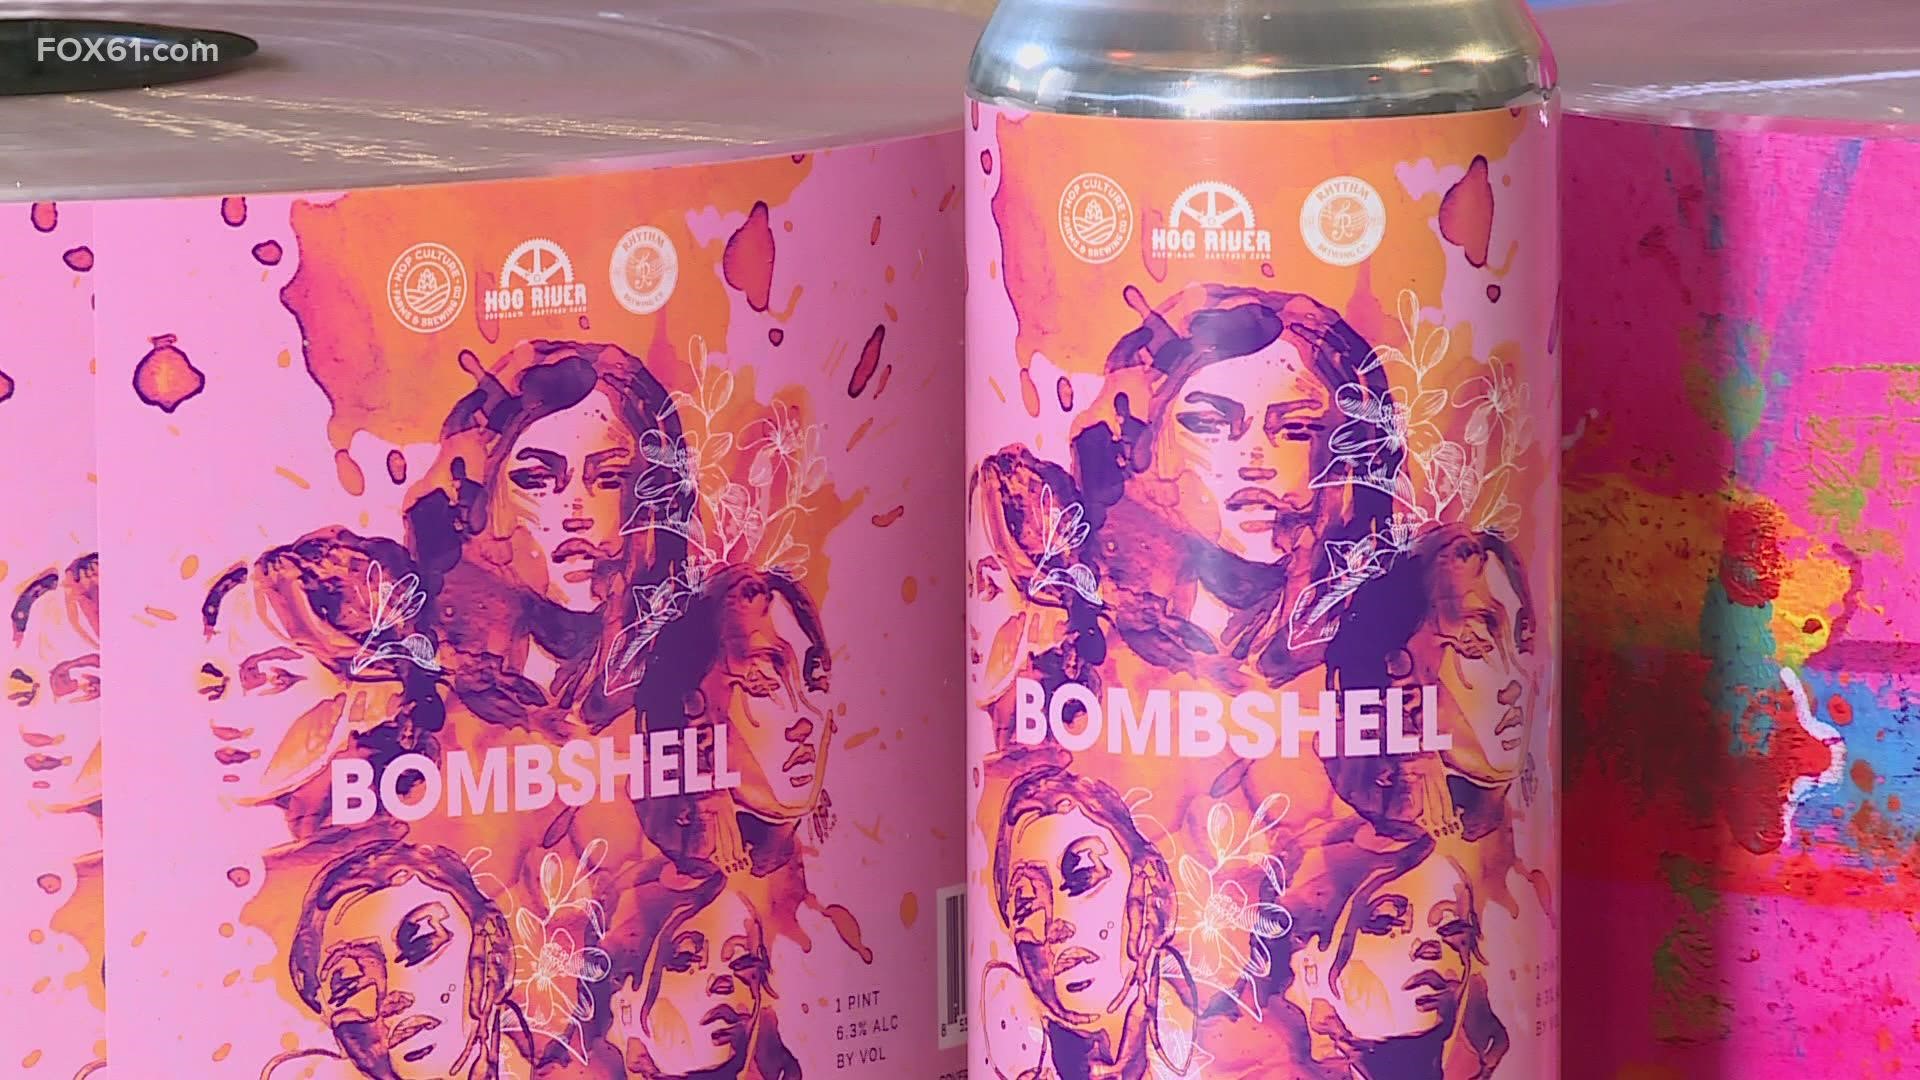 Local brewers pushing for increases opportunities for women